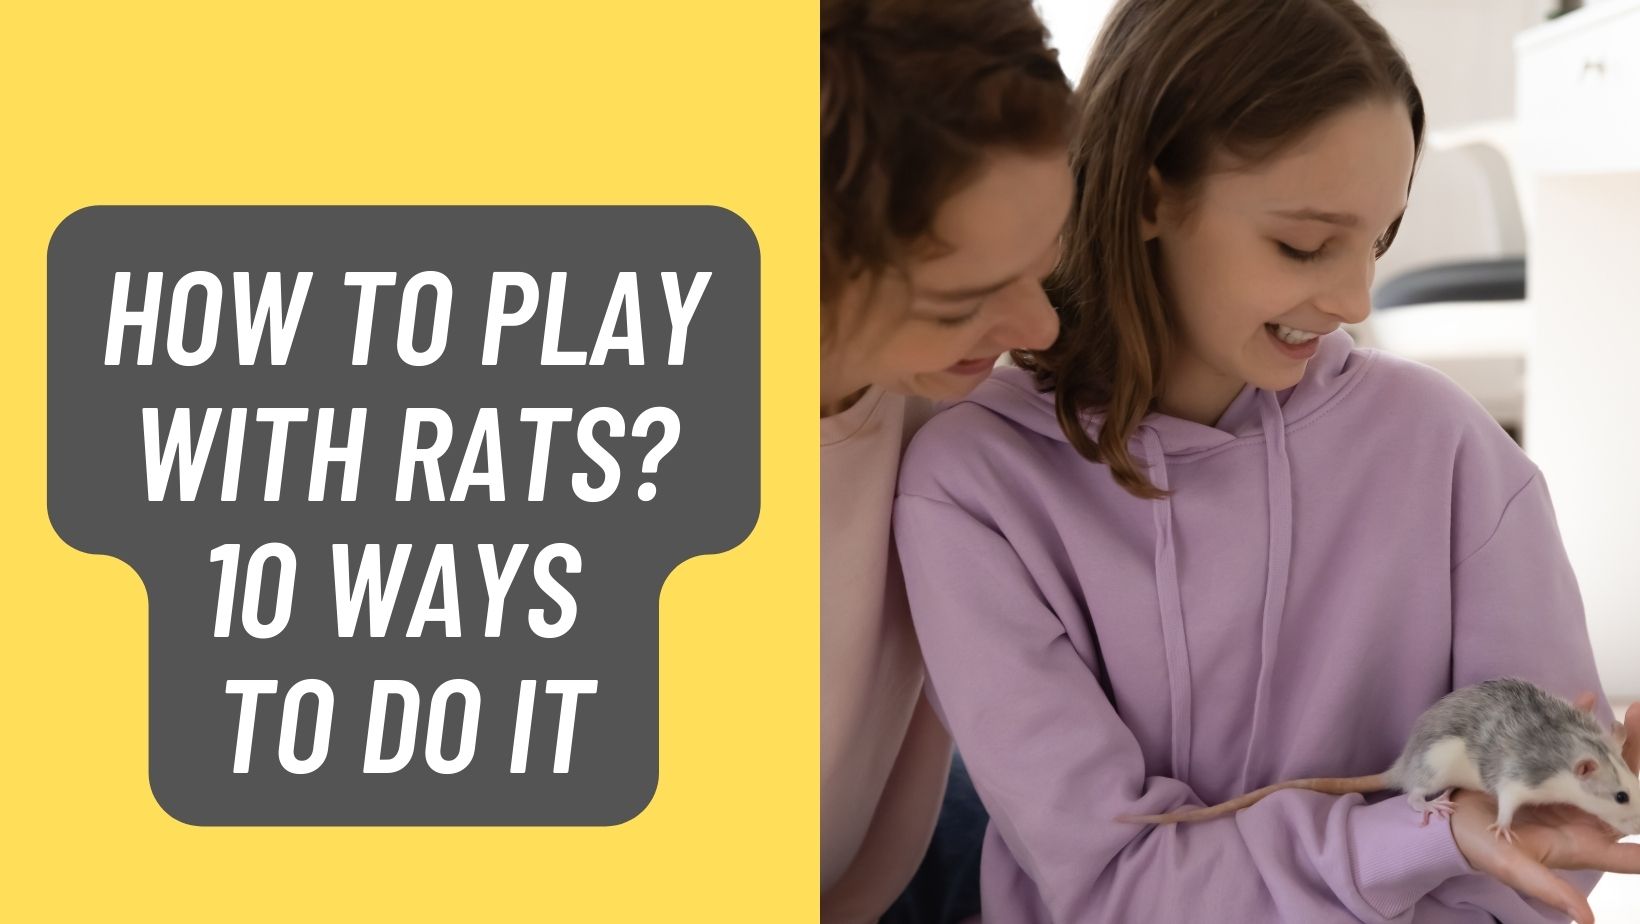 How to Play with Rats? 4 Easy Ways